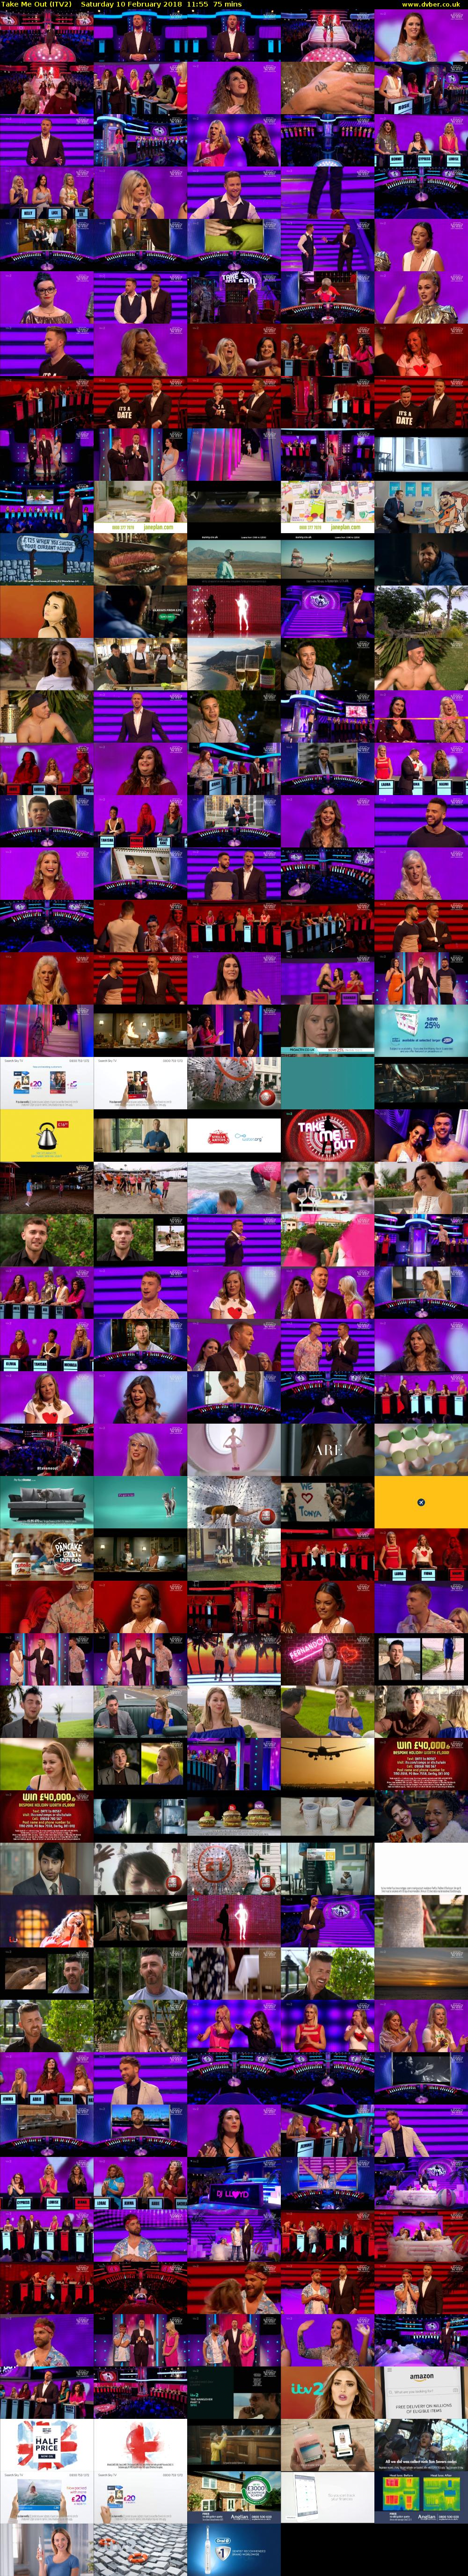 Take Me Out (ITV2) Saturday 10 February 2018 11:55 - 13:10